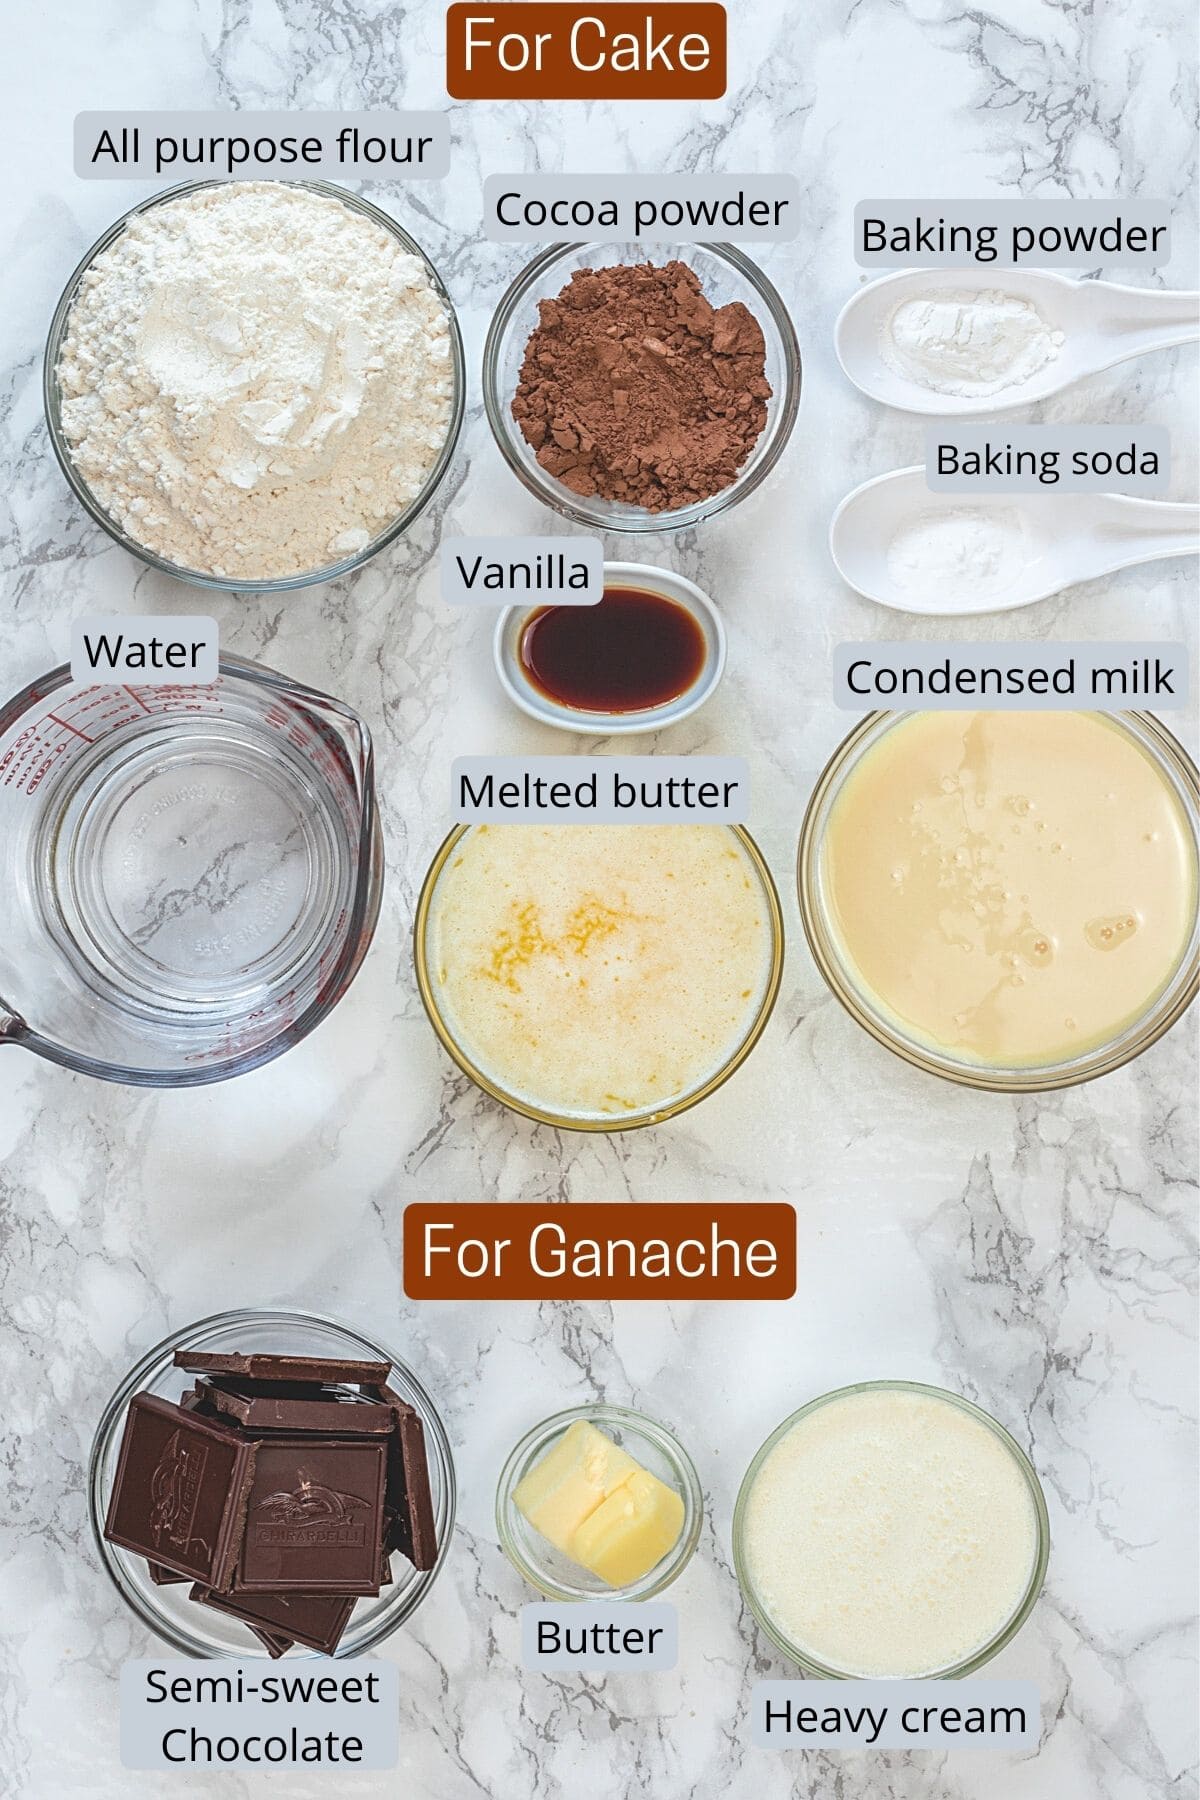 Ingredients used in chocolate cake and ganache in individual bowls.